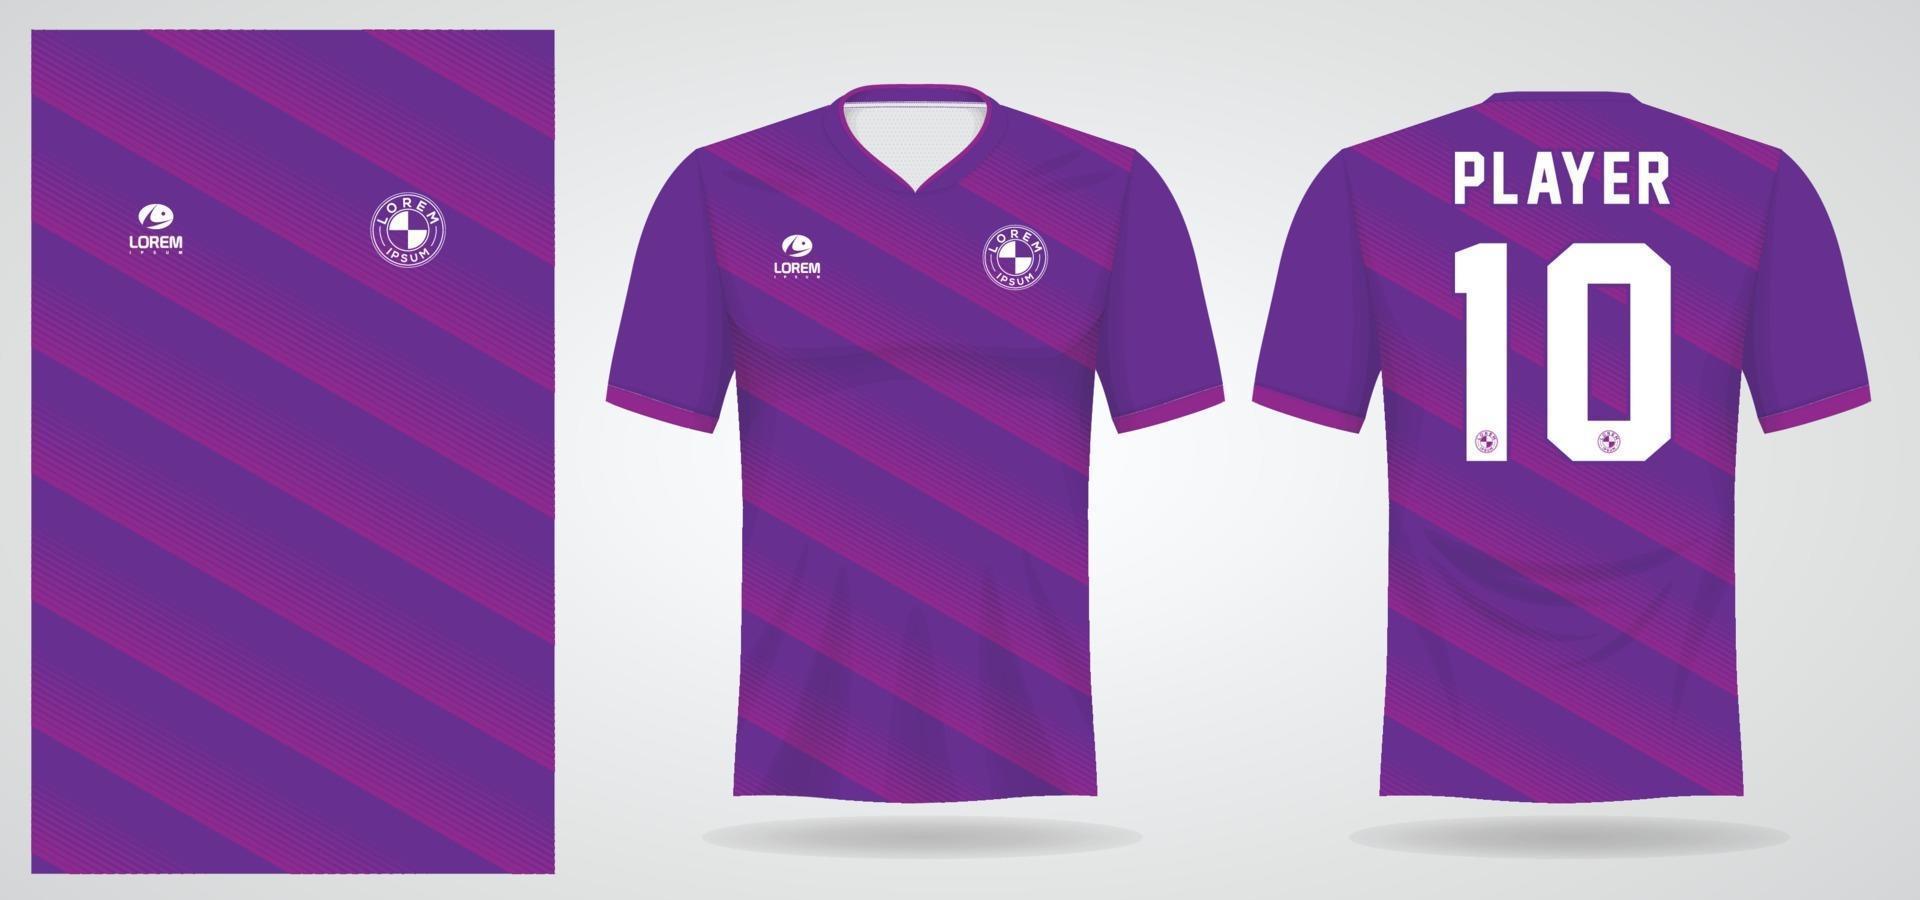 purple sports jersey template for team uniforms and Soccer t shirt design vector